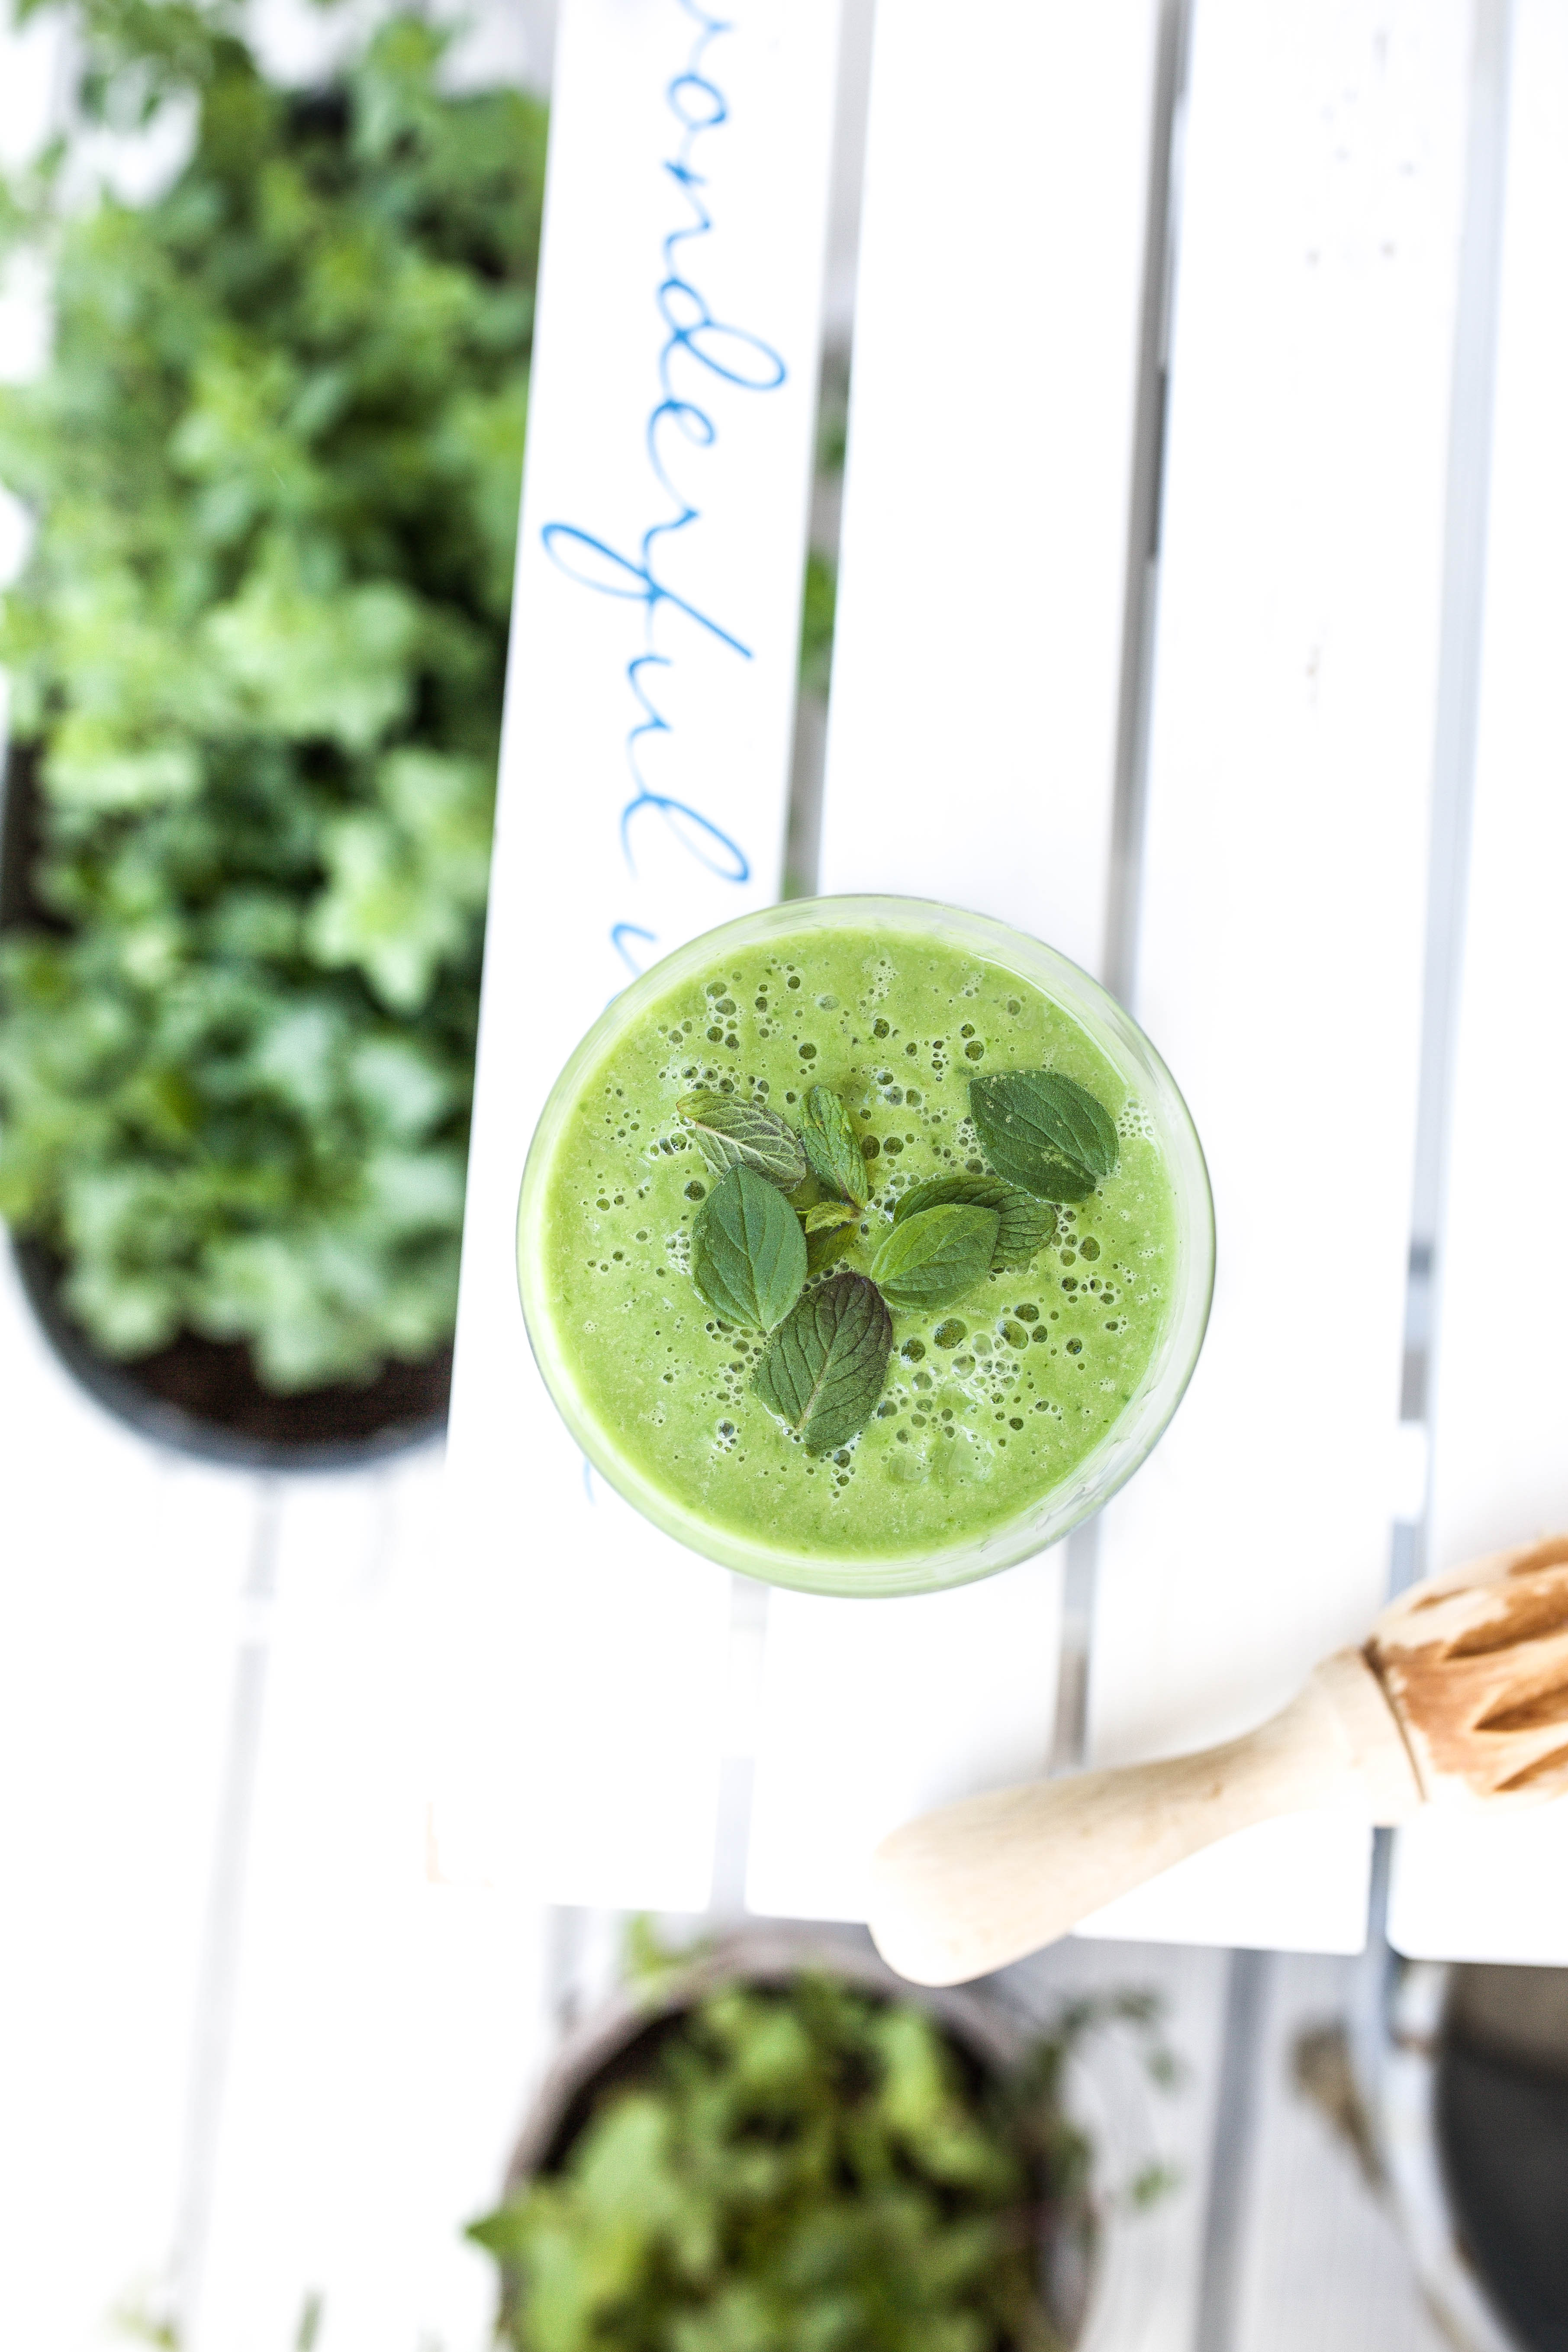 ‘Pear based green smoothie’